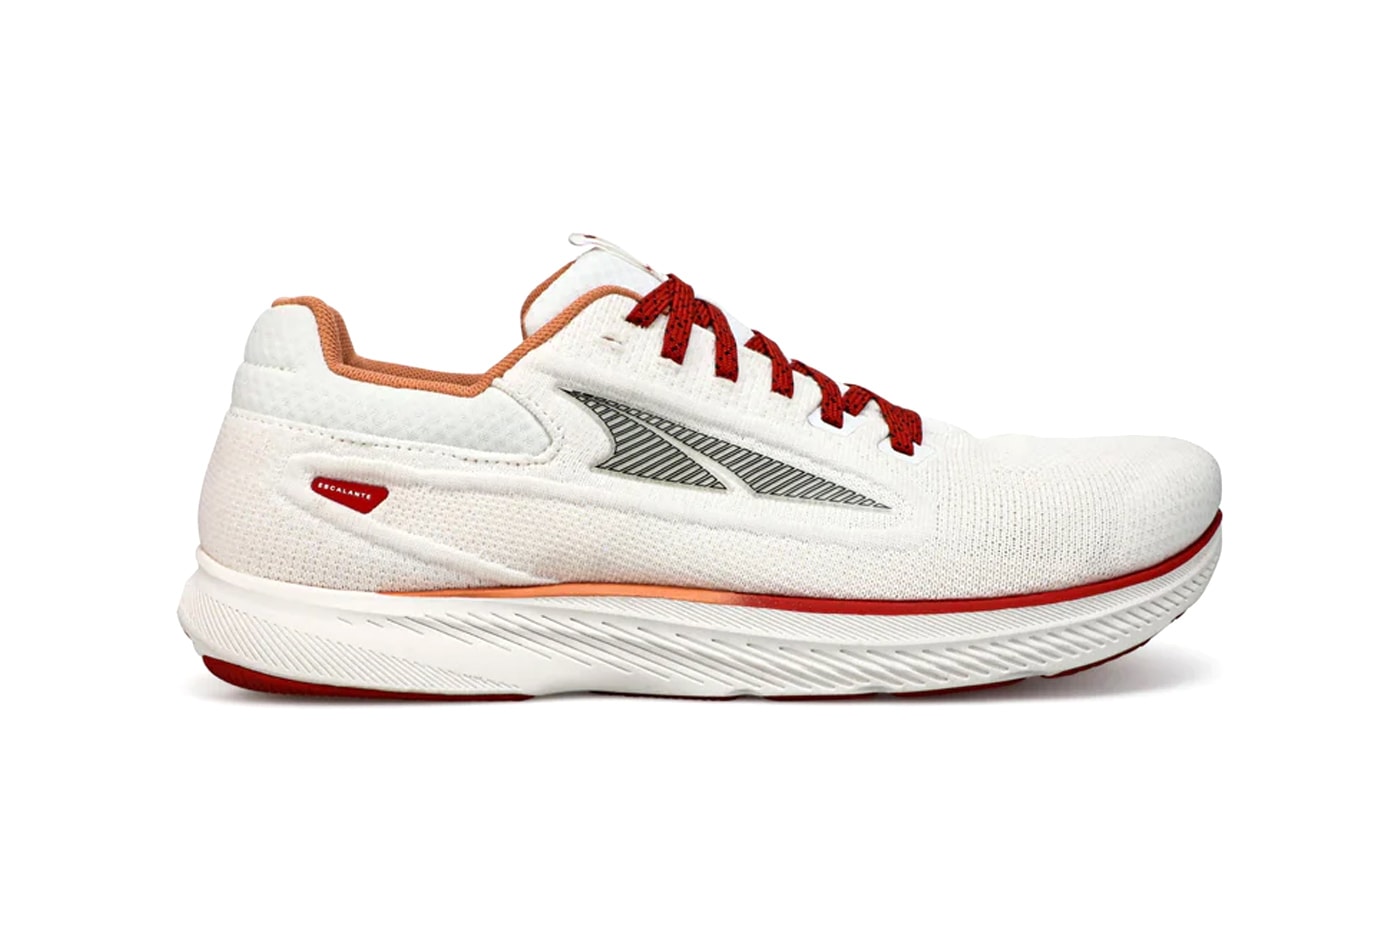 ALTRA Escalante 3 Best Running Shoes Right Now to Buy 2023